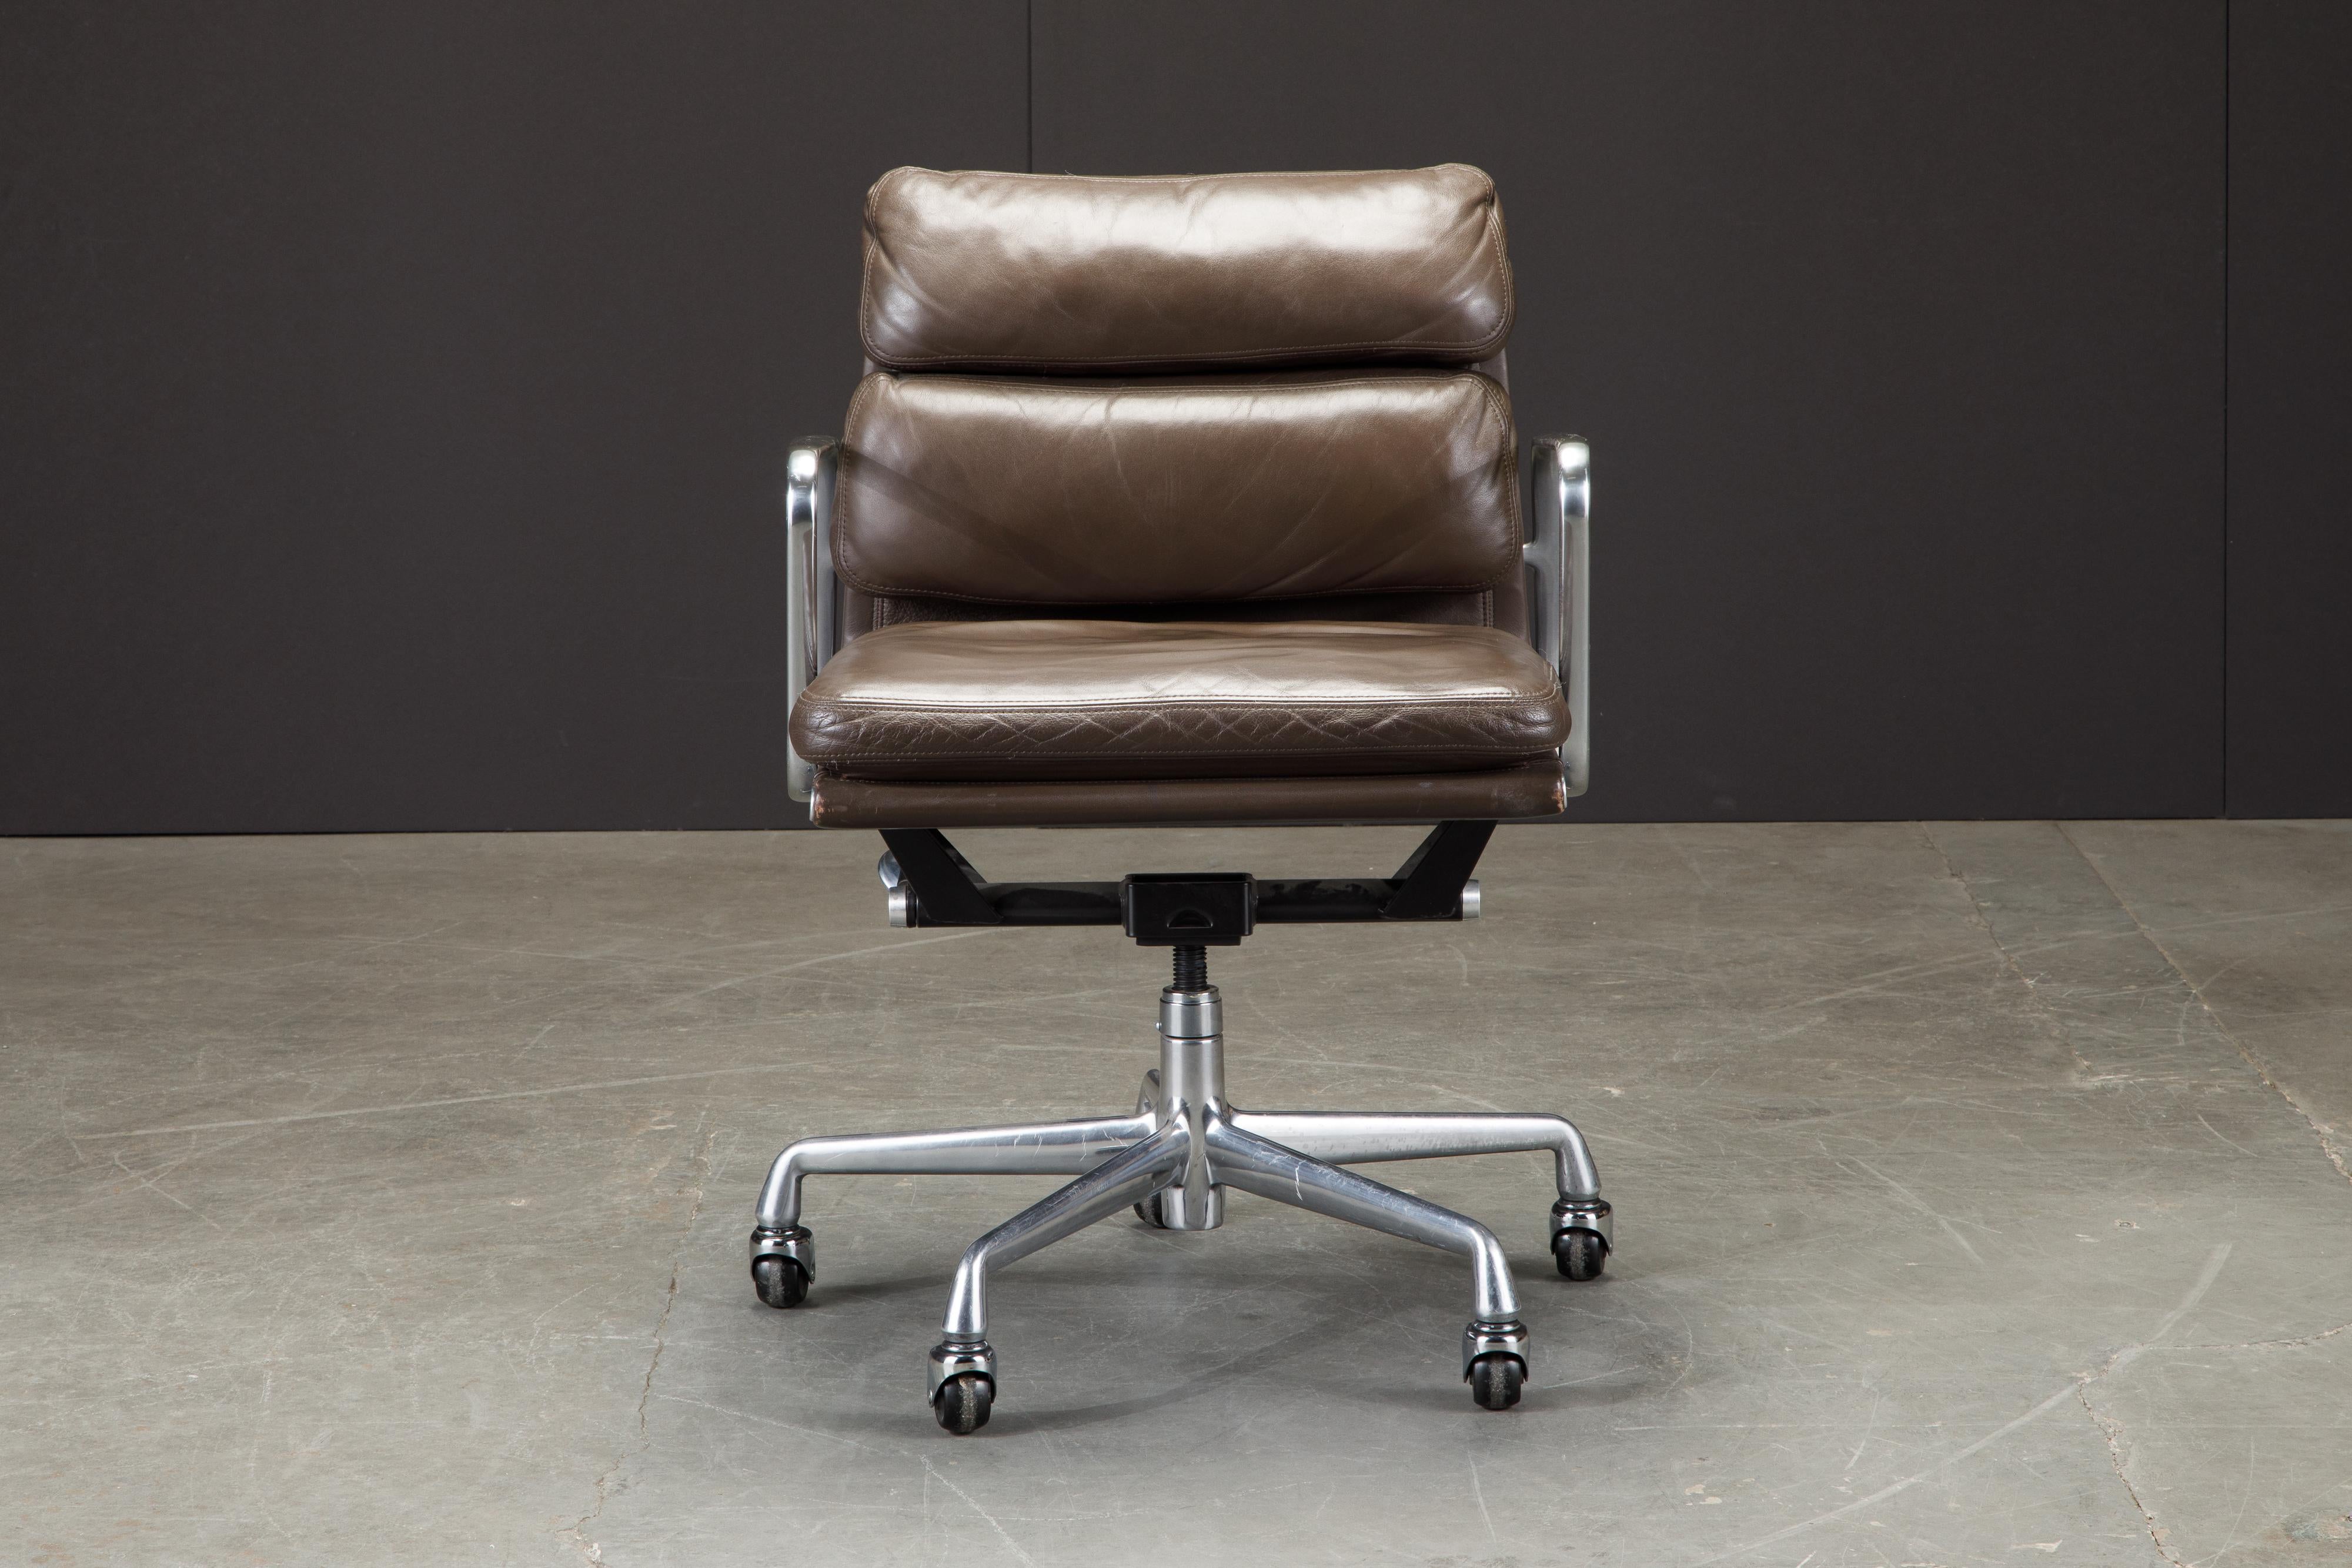 This sought after and in-demand leather desk chair is the classic 'Soft Pad Management Chair' from the aluminum group line, designed by Charles and Ray Eames for Herman Miller. Featuring its original vintage brown leather upholstery over five-star